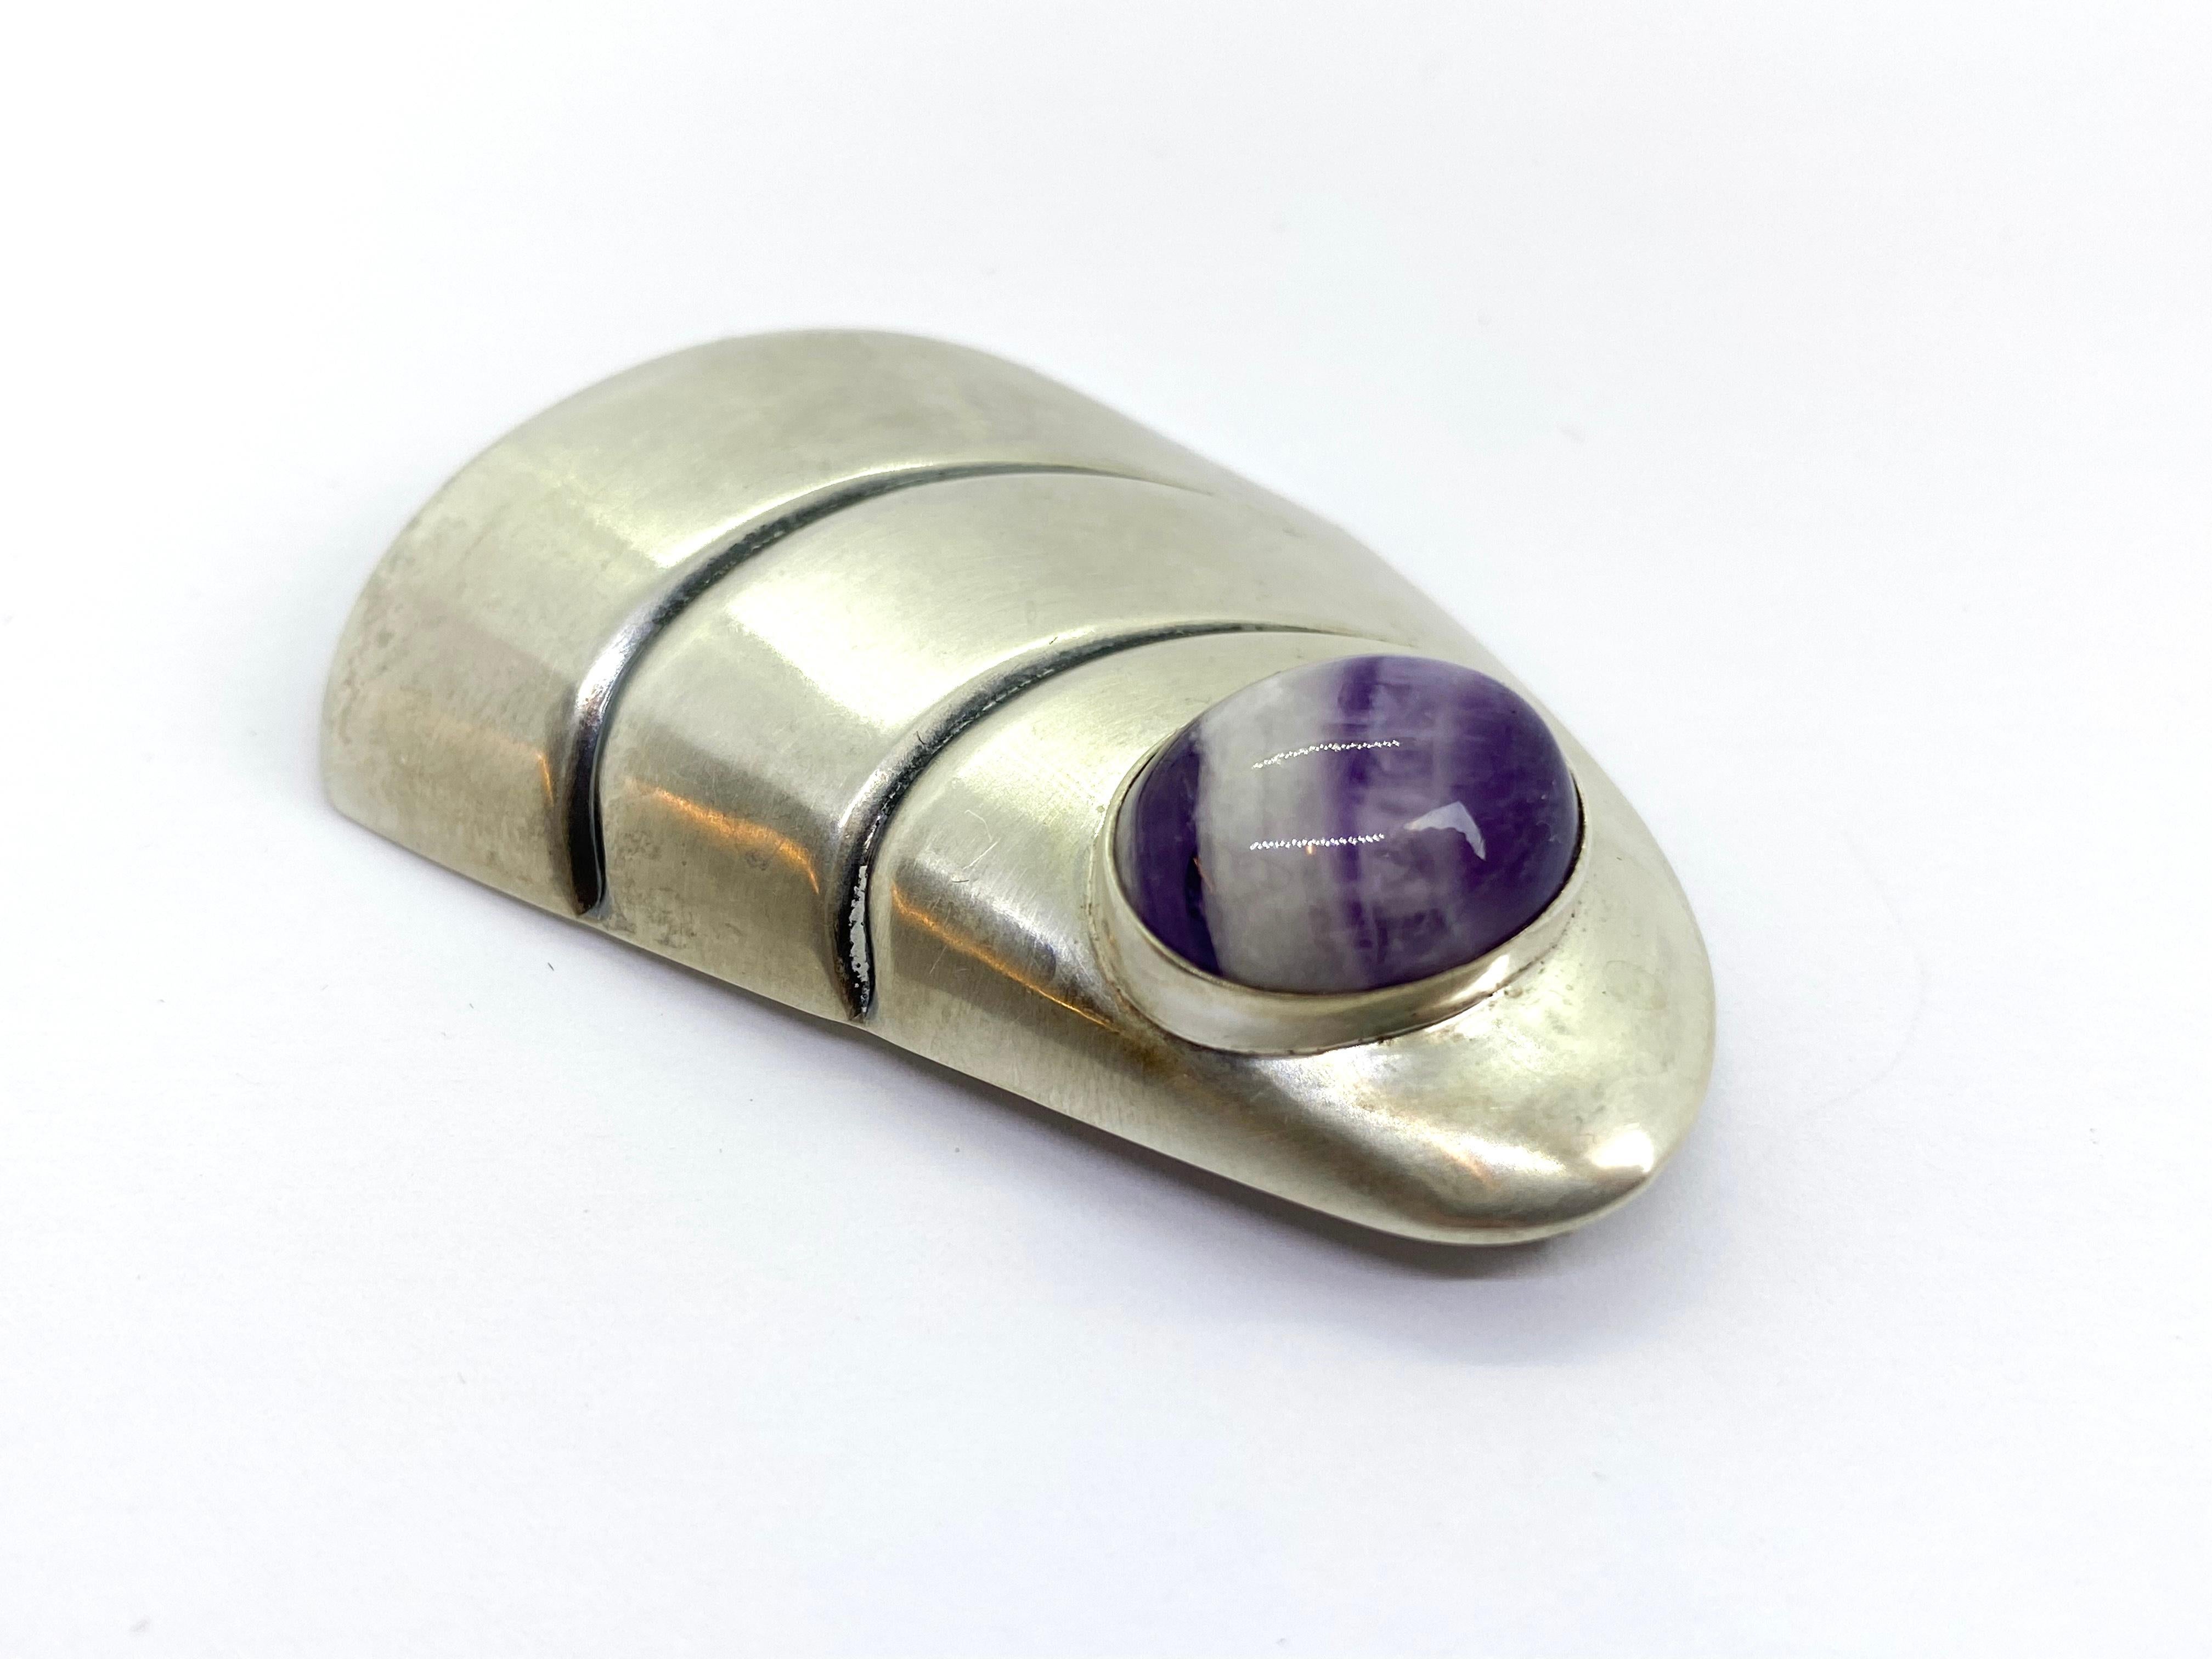 Modernist Silver Brooch Finland 1963 Manufactured by Kimmo Nuotio Heinola Finland For Sale